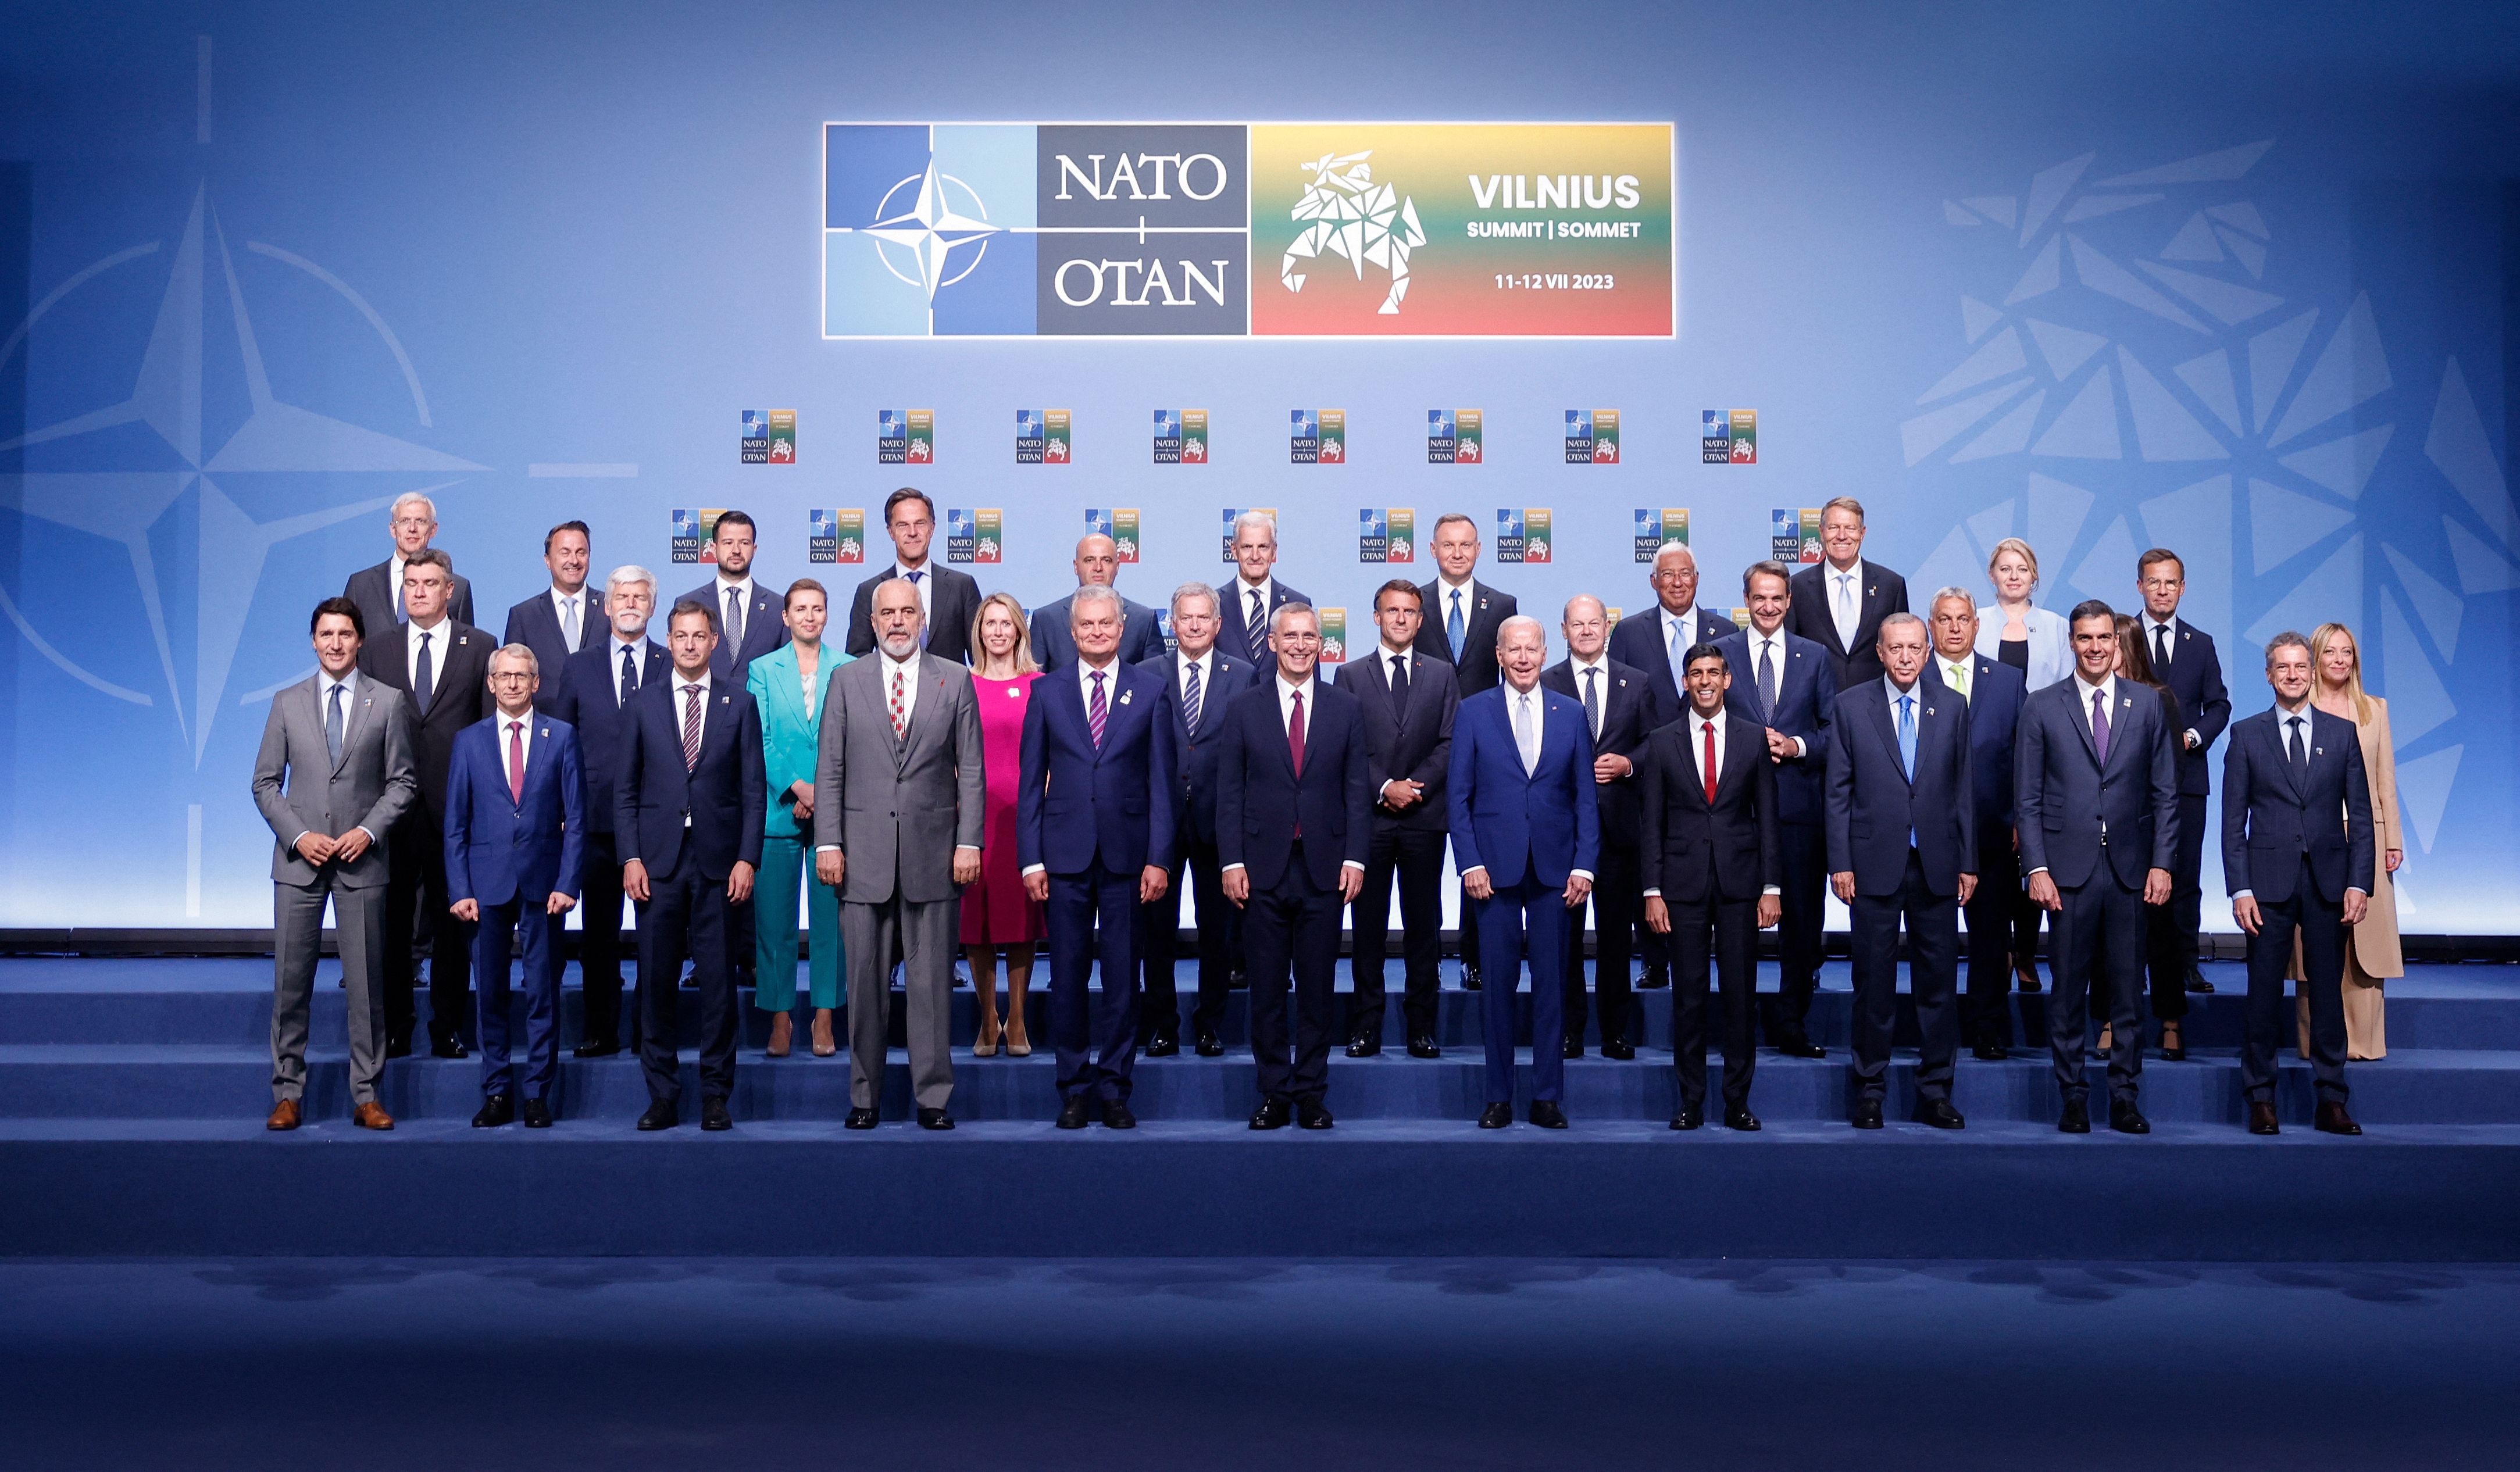 NATO Secretary General Jens Stoltenberg, center, poses for an official family photo with the participants of the NATO Summit in Vilnius, Lithuania, on July 11.